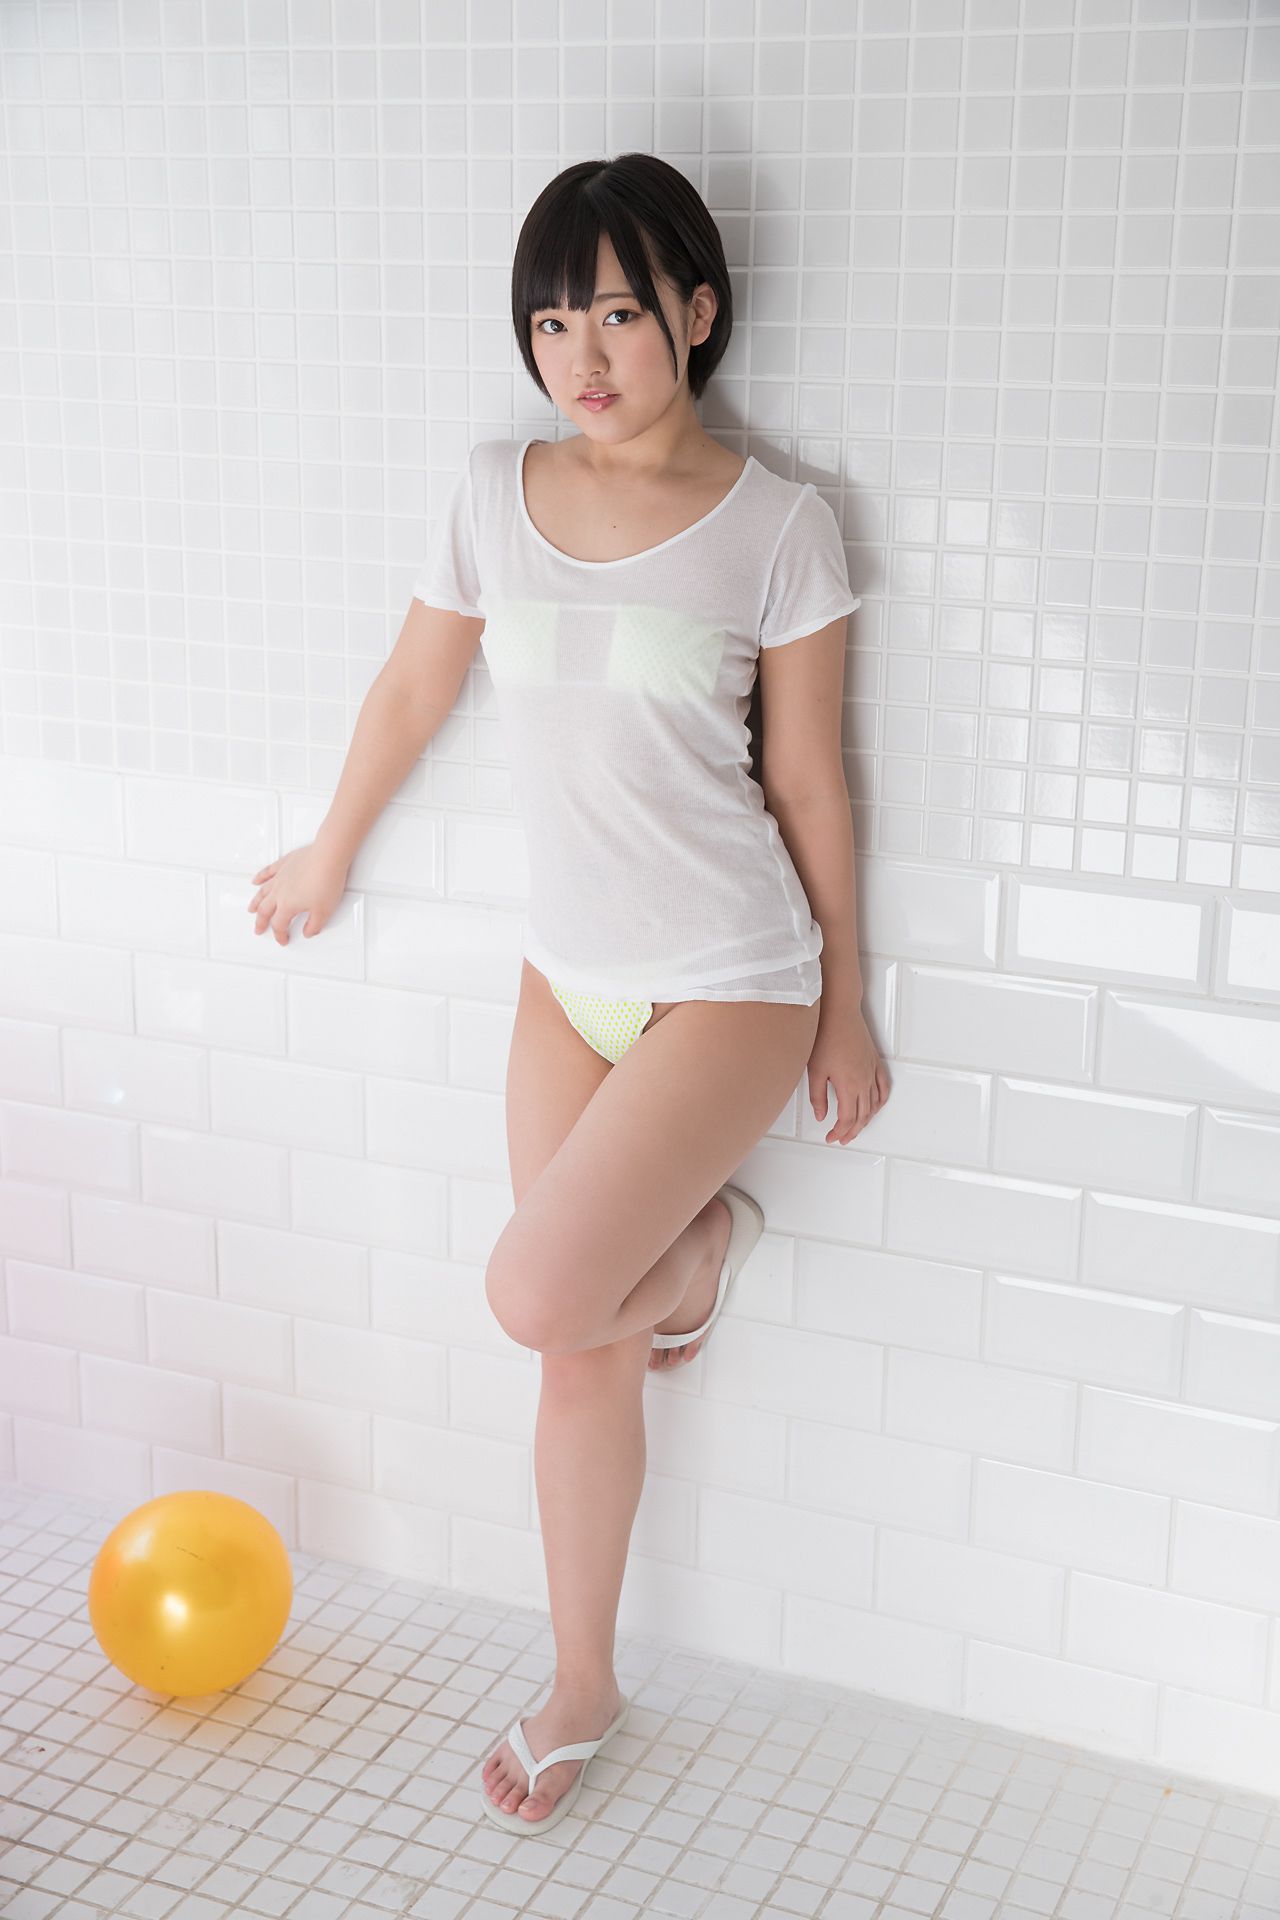 [Minisuka.tv] 香月りお - Special Gallery 7.4